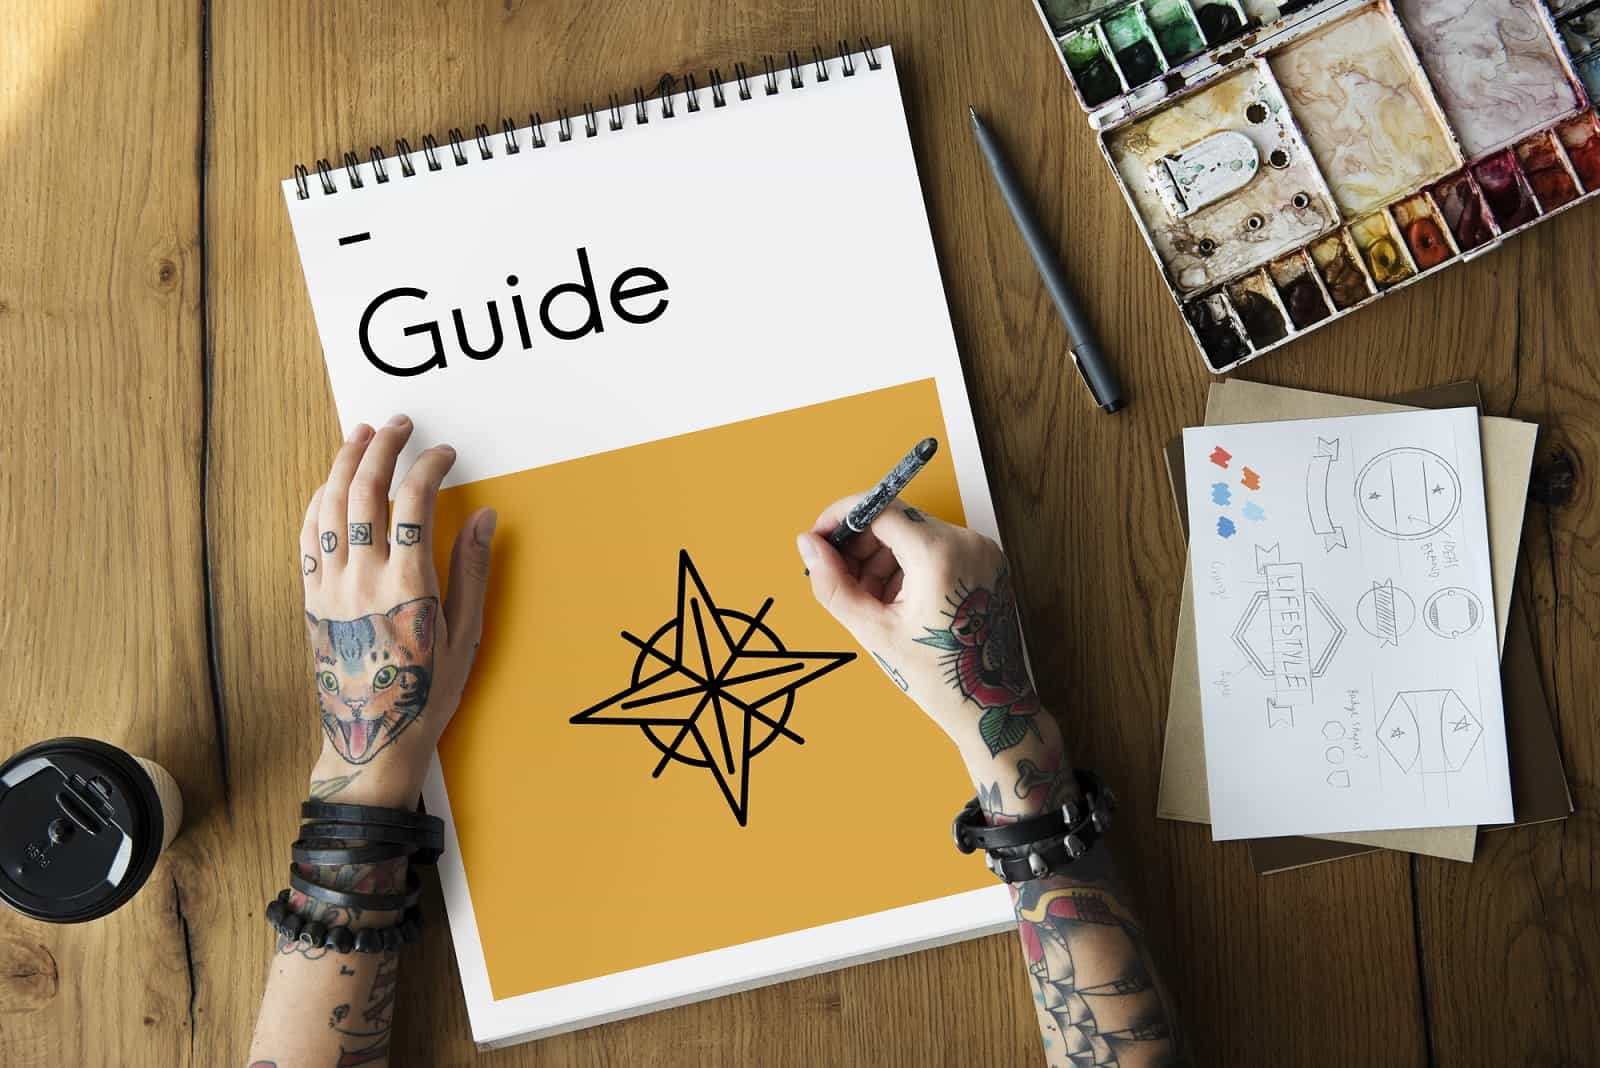 BEFORE GETTING A TATTOO – A 101 GUIDE